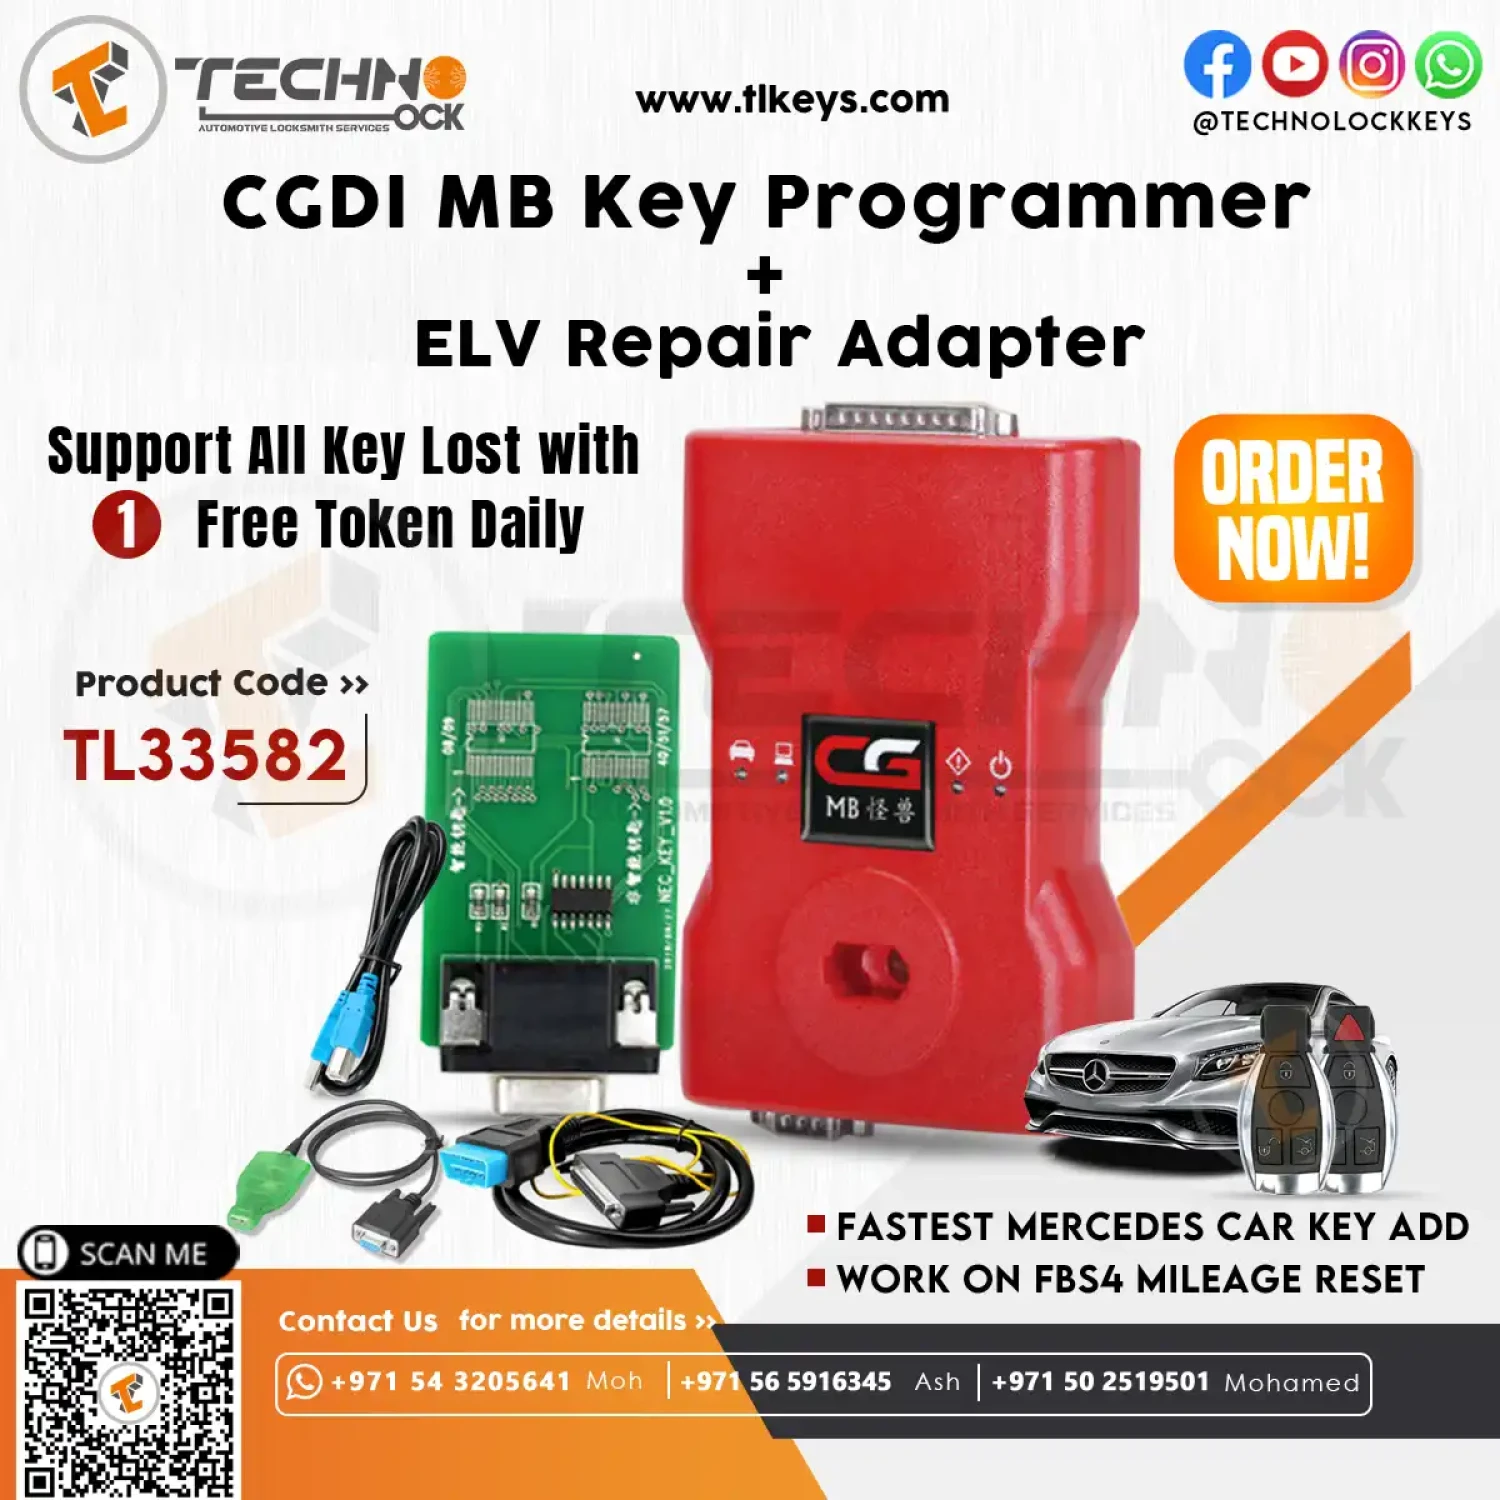 Elevate your Benz with CGDI MB Key Programmer. Essential for quick key addition and all-key-lost scenarios